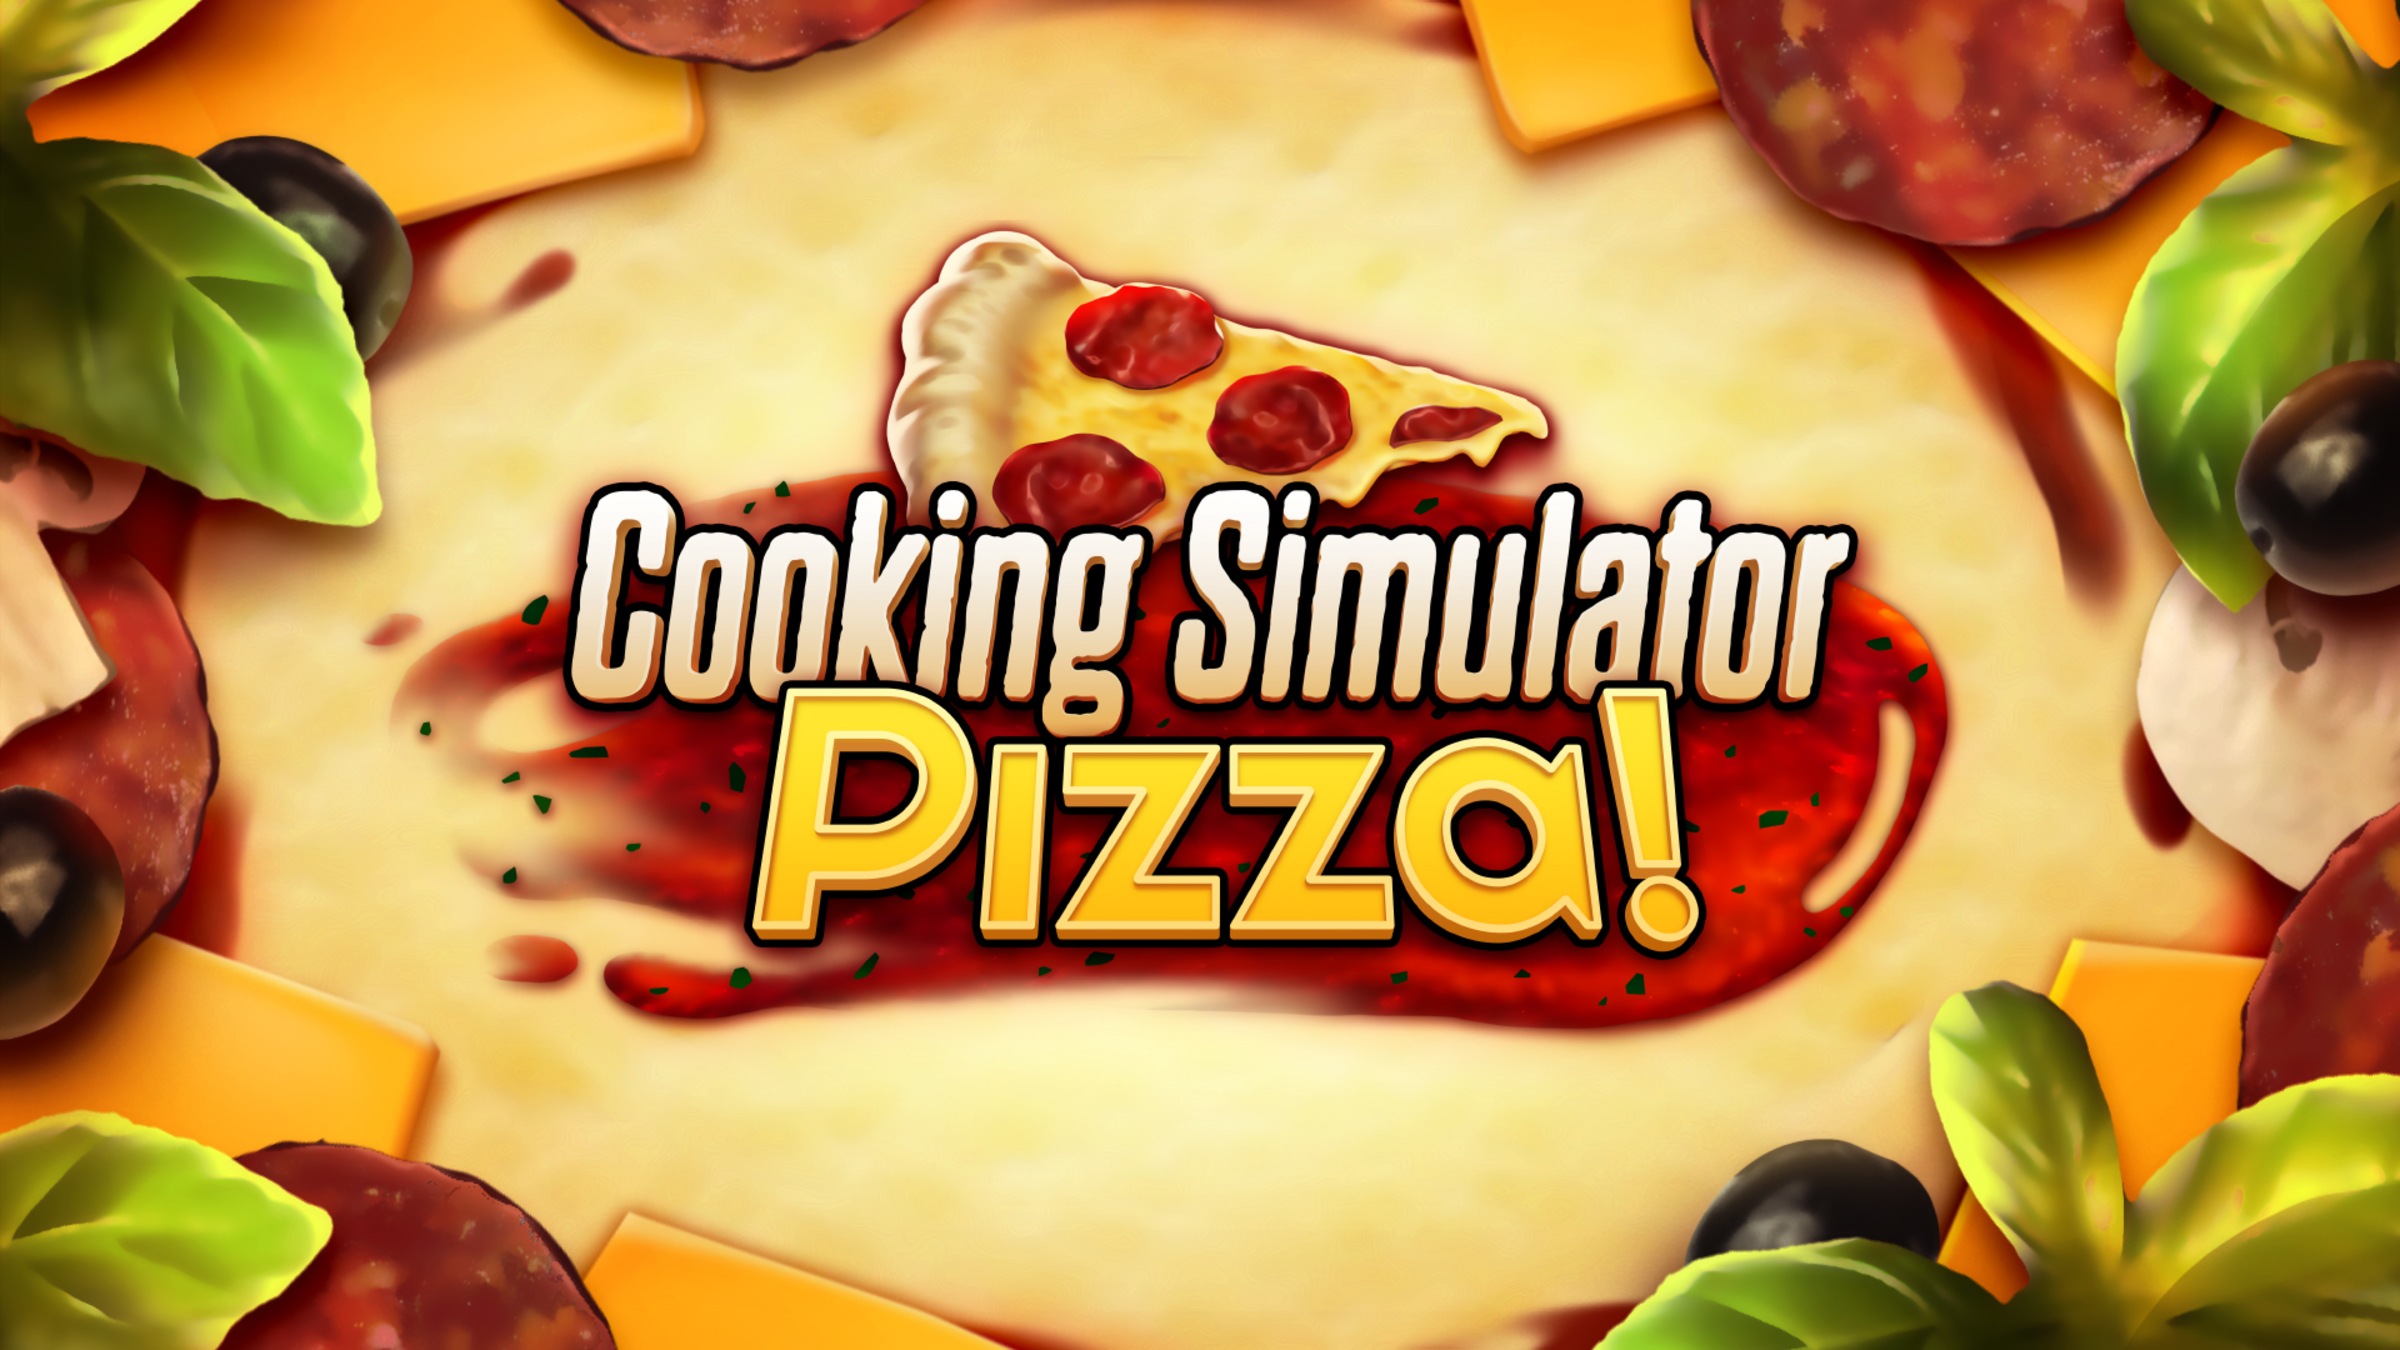 Cooking Simulator on X: Today is the World Pizza Day aka “You can